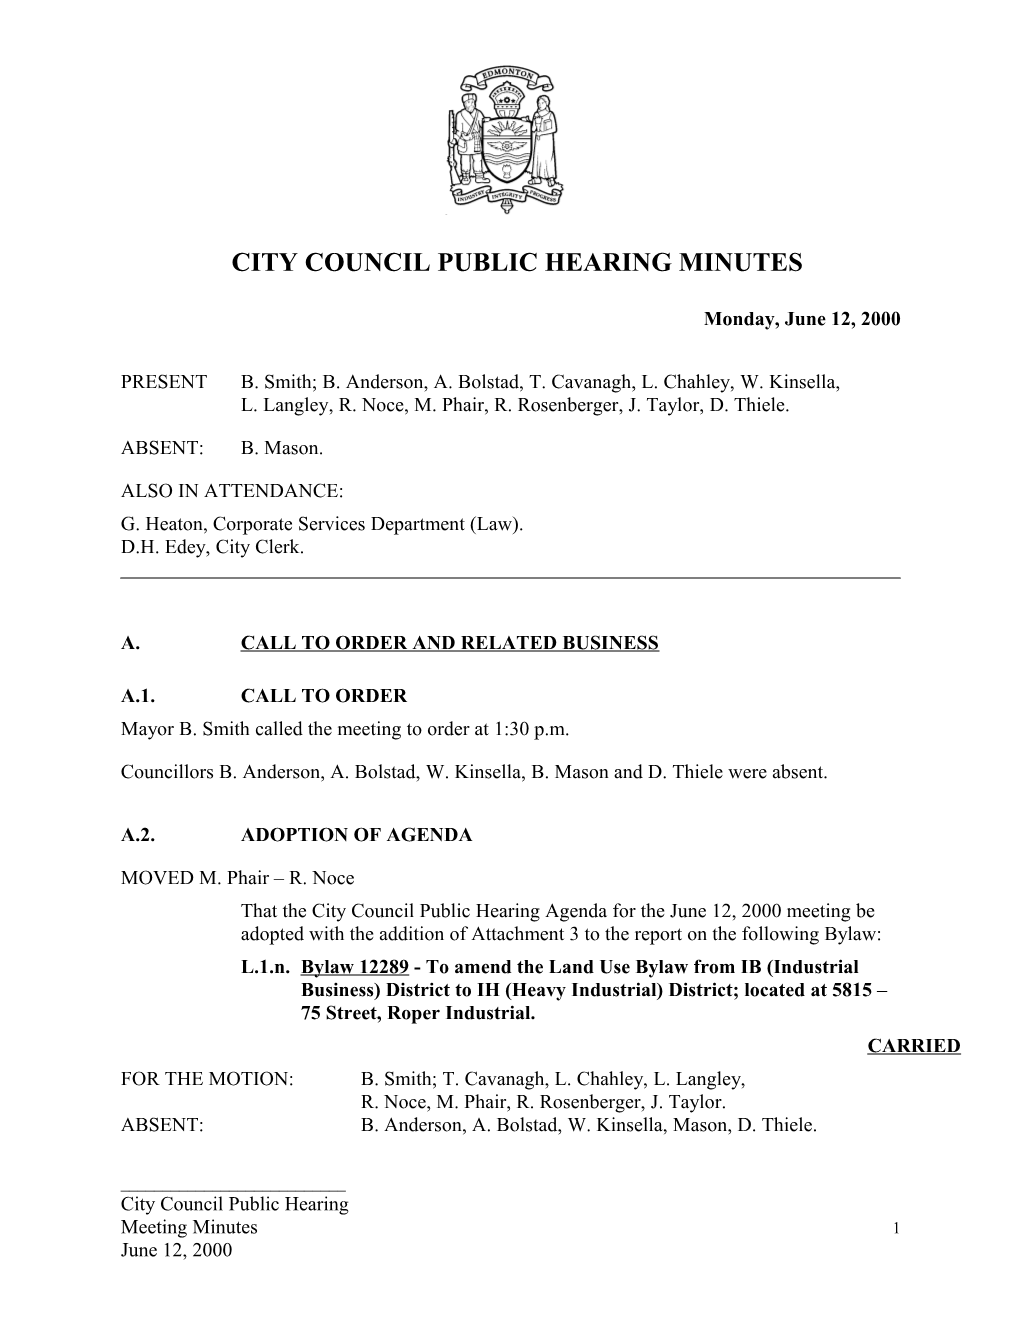 Minutes for City Council June 12, 2000 Meeting